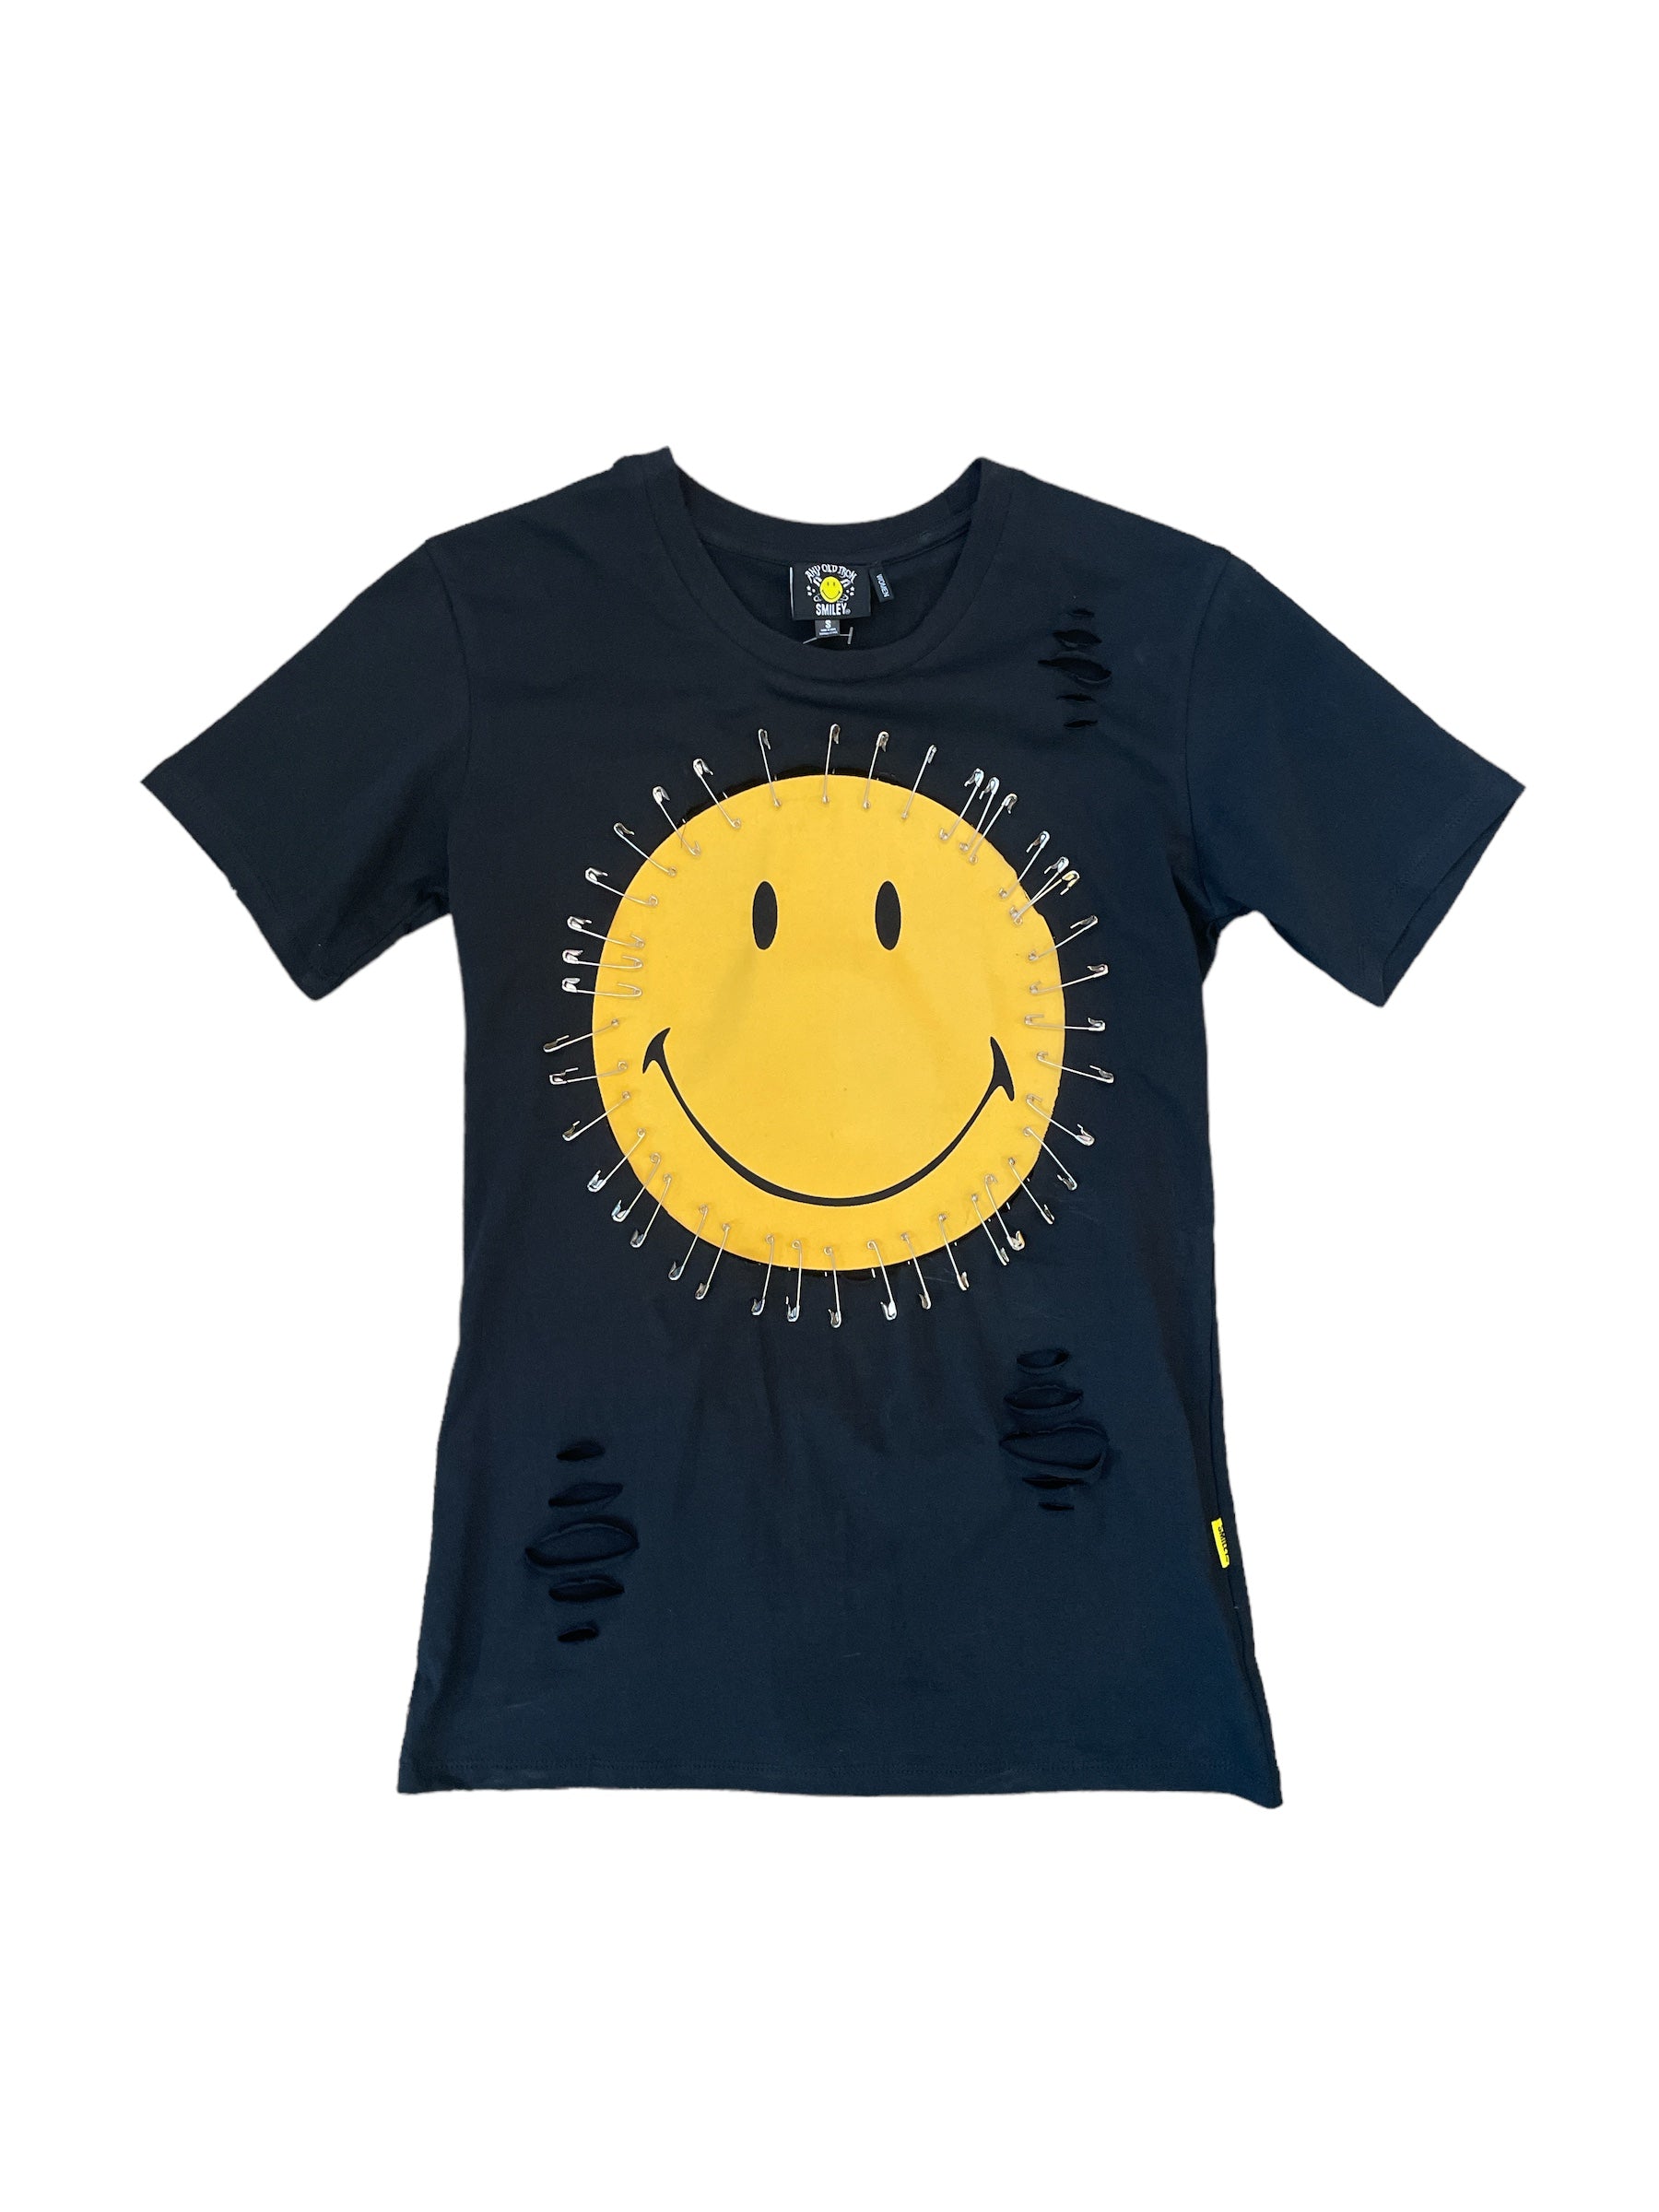 Women’s Black / Yellow / Orange Any Old Iron X Smiley Just Safe T-Shirt S